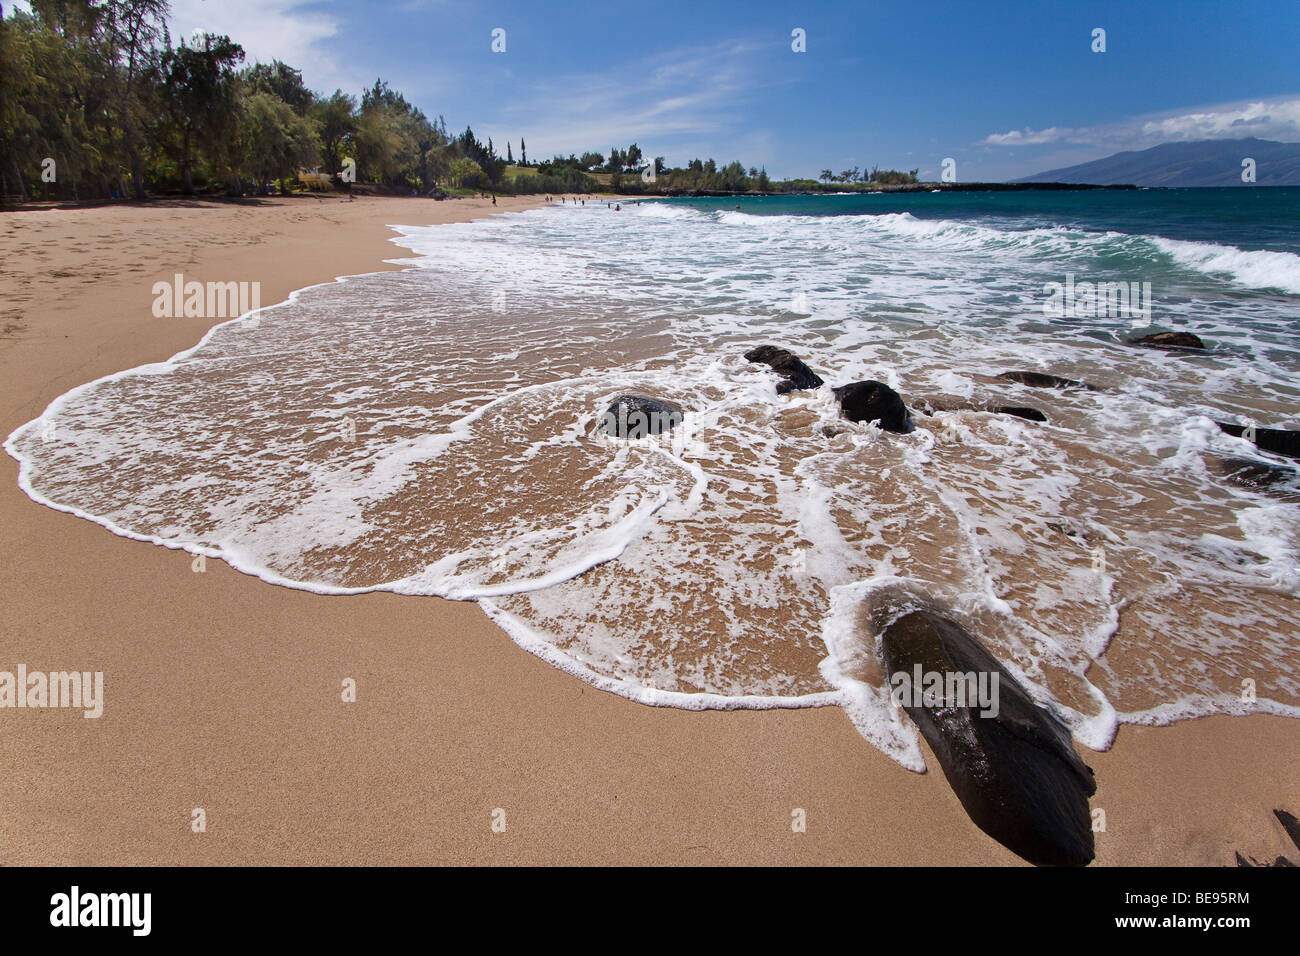 Flemming Beach is located on the North end of West Maui, just below the Ritz-Carlton Hotel, Maui, Hawaii. Stock Photo